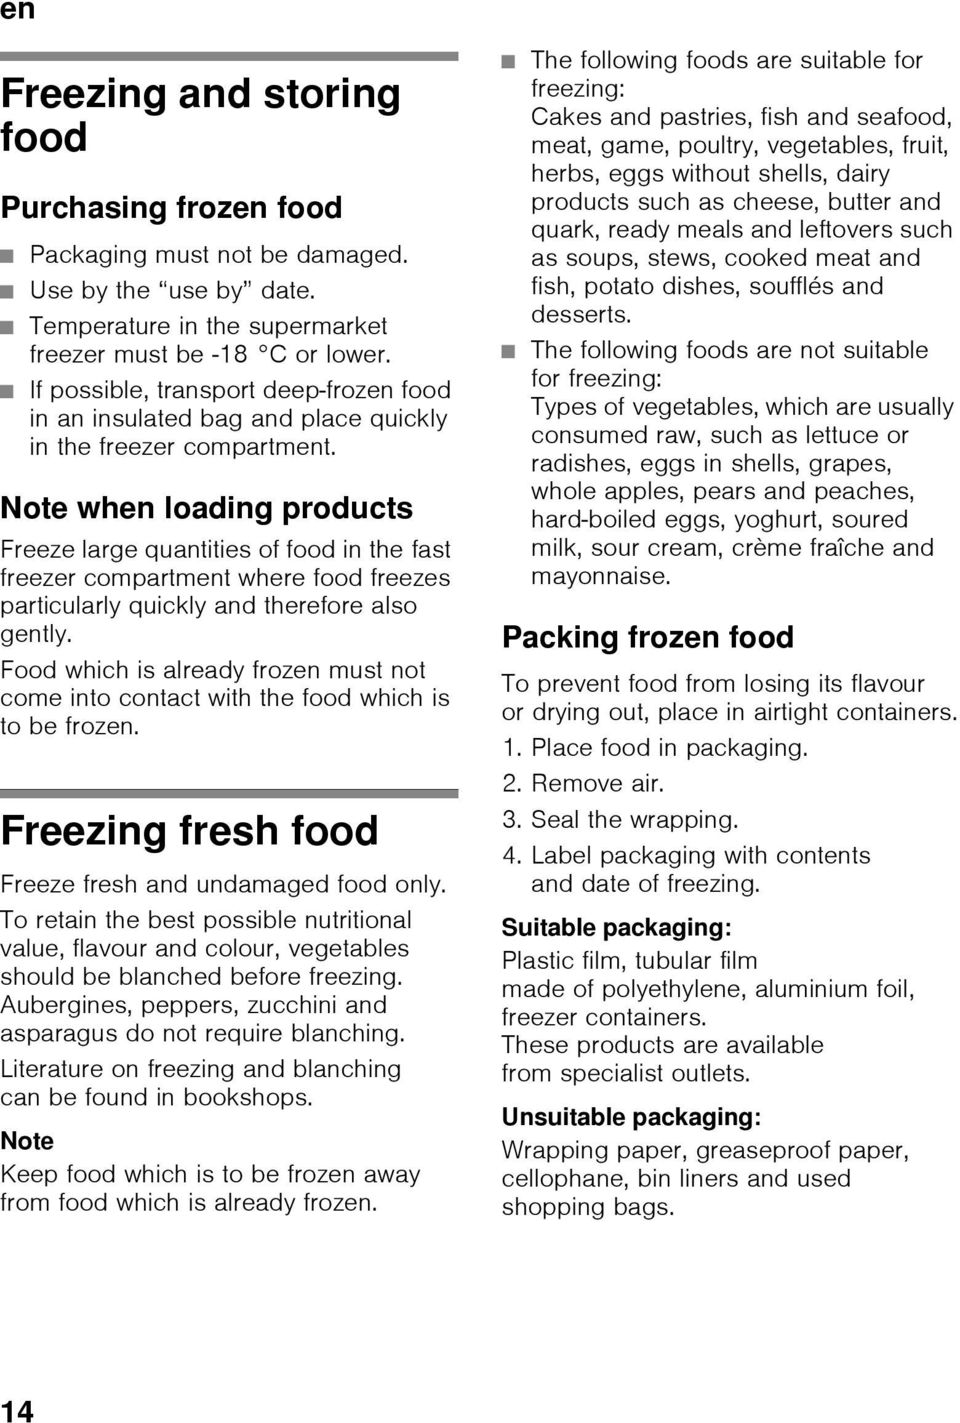 Note when loading products Freeze large quantities of food in the fast freezer compartment where food freezes particularly quickly and therefore also gently.